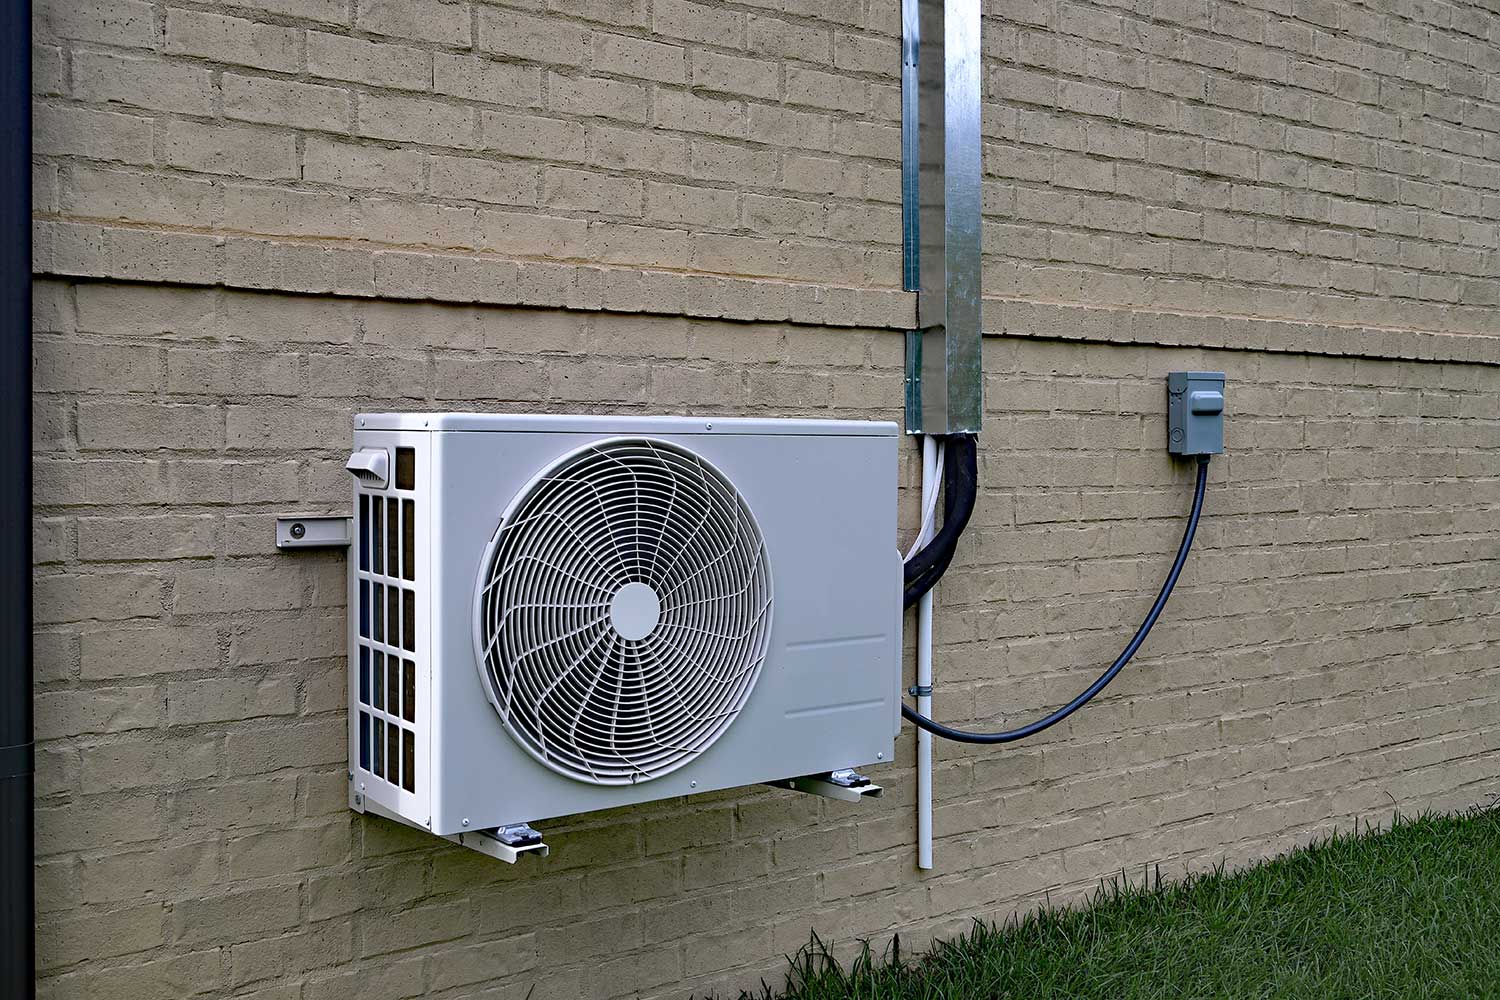 I have to hire someone to do an air conditioning system replacement in Palm Bay, FL